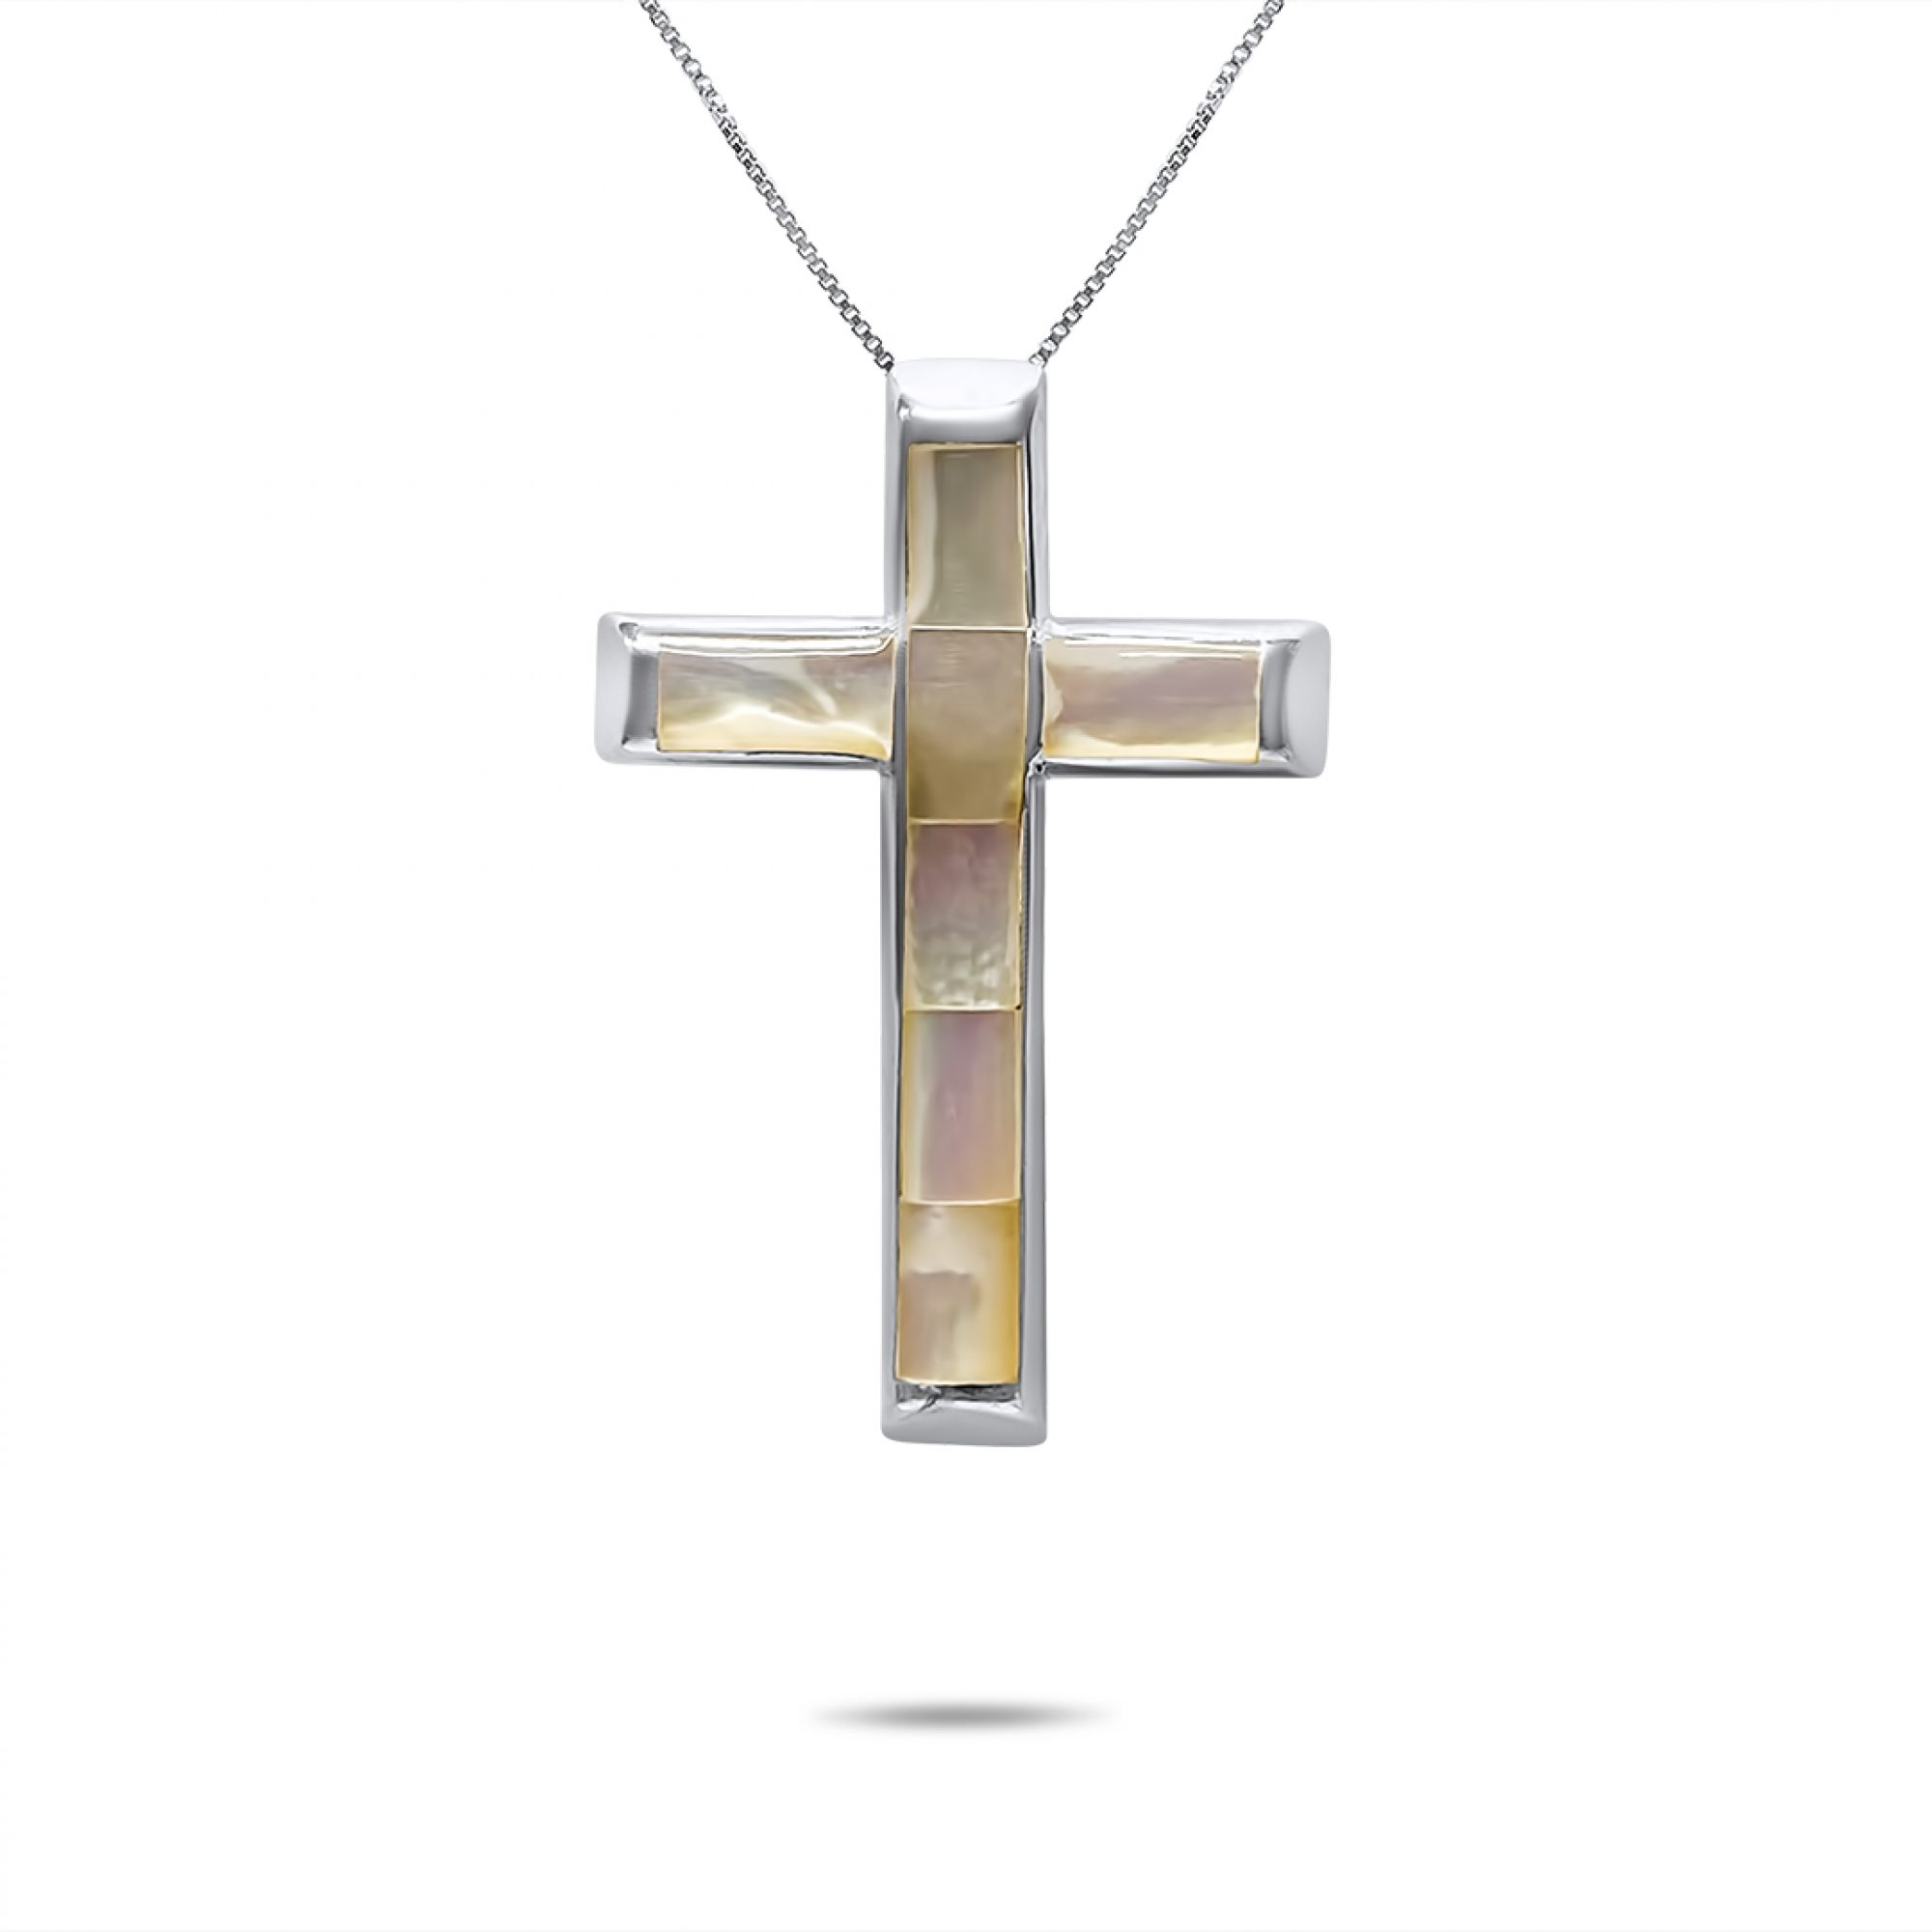 Cross necklace with mother of pearl